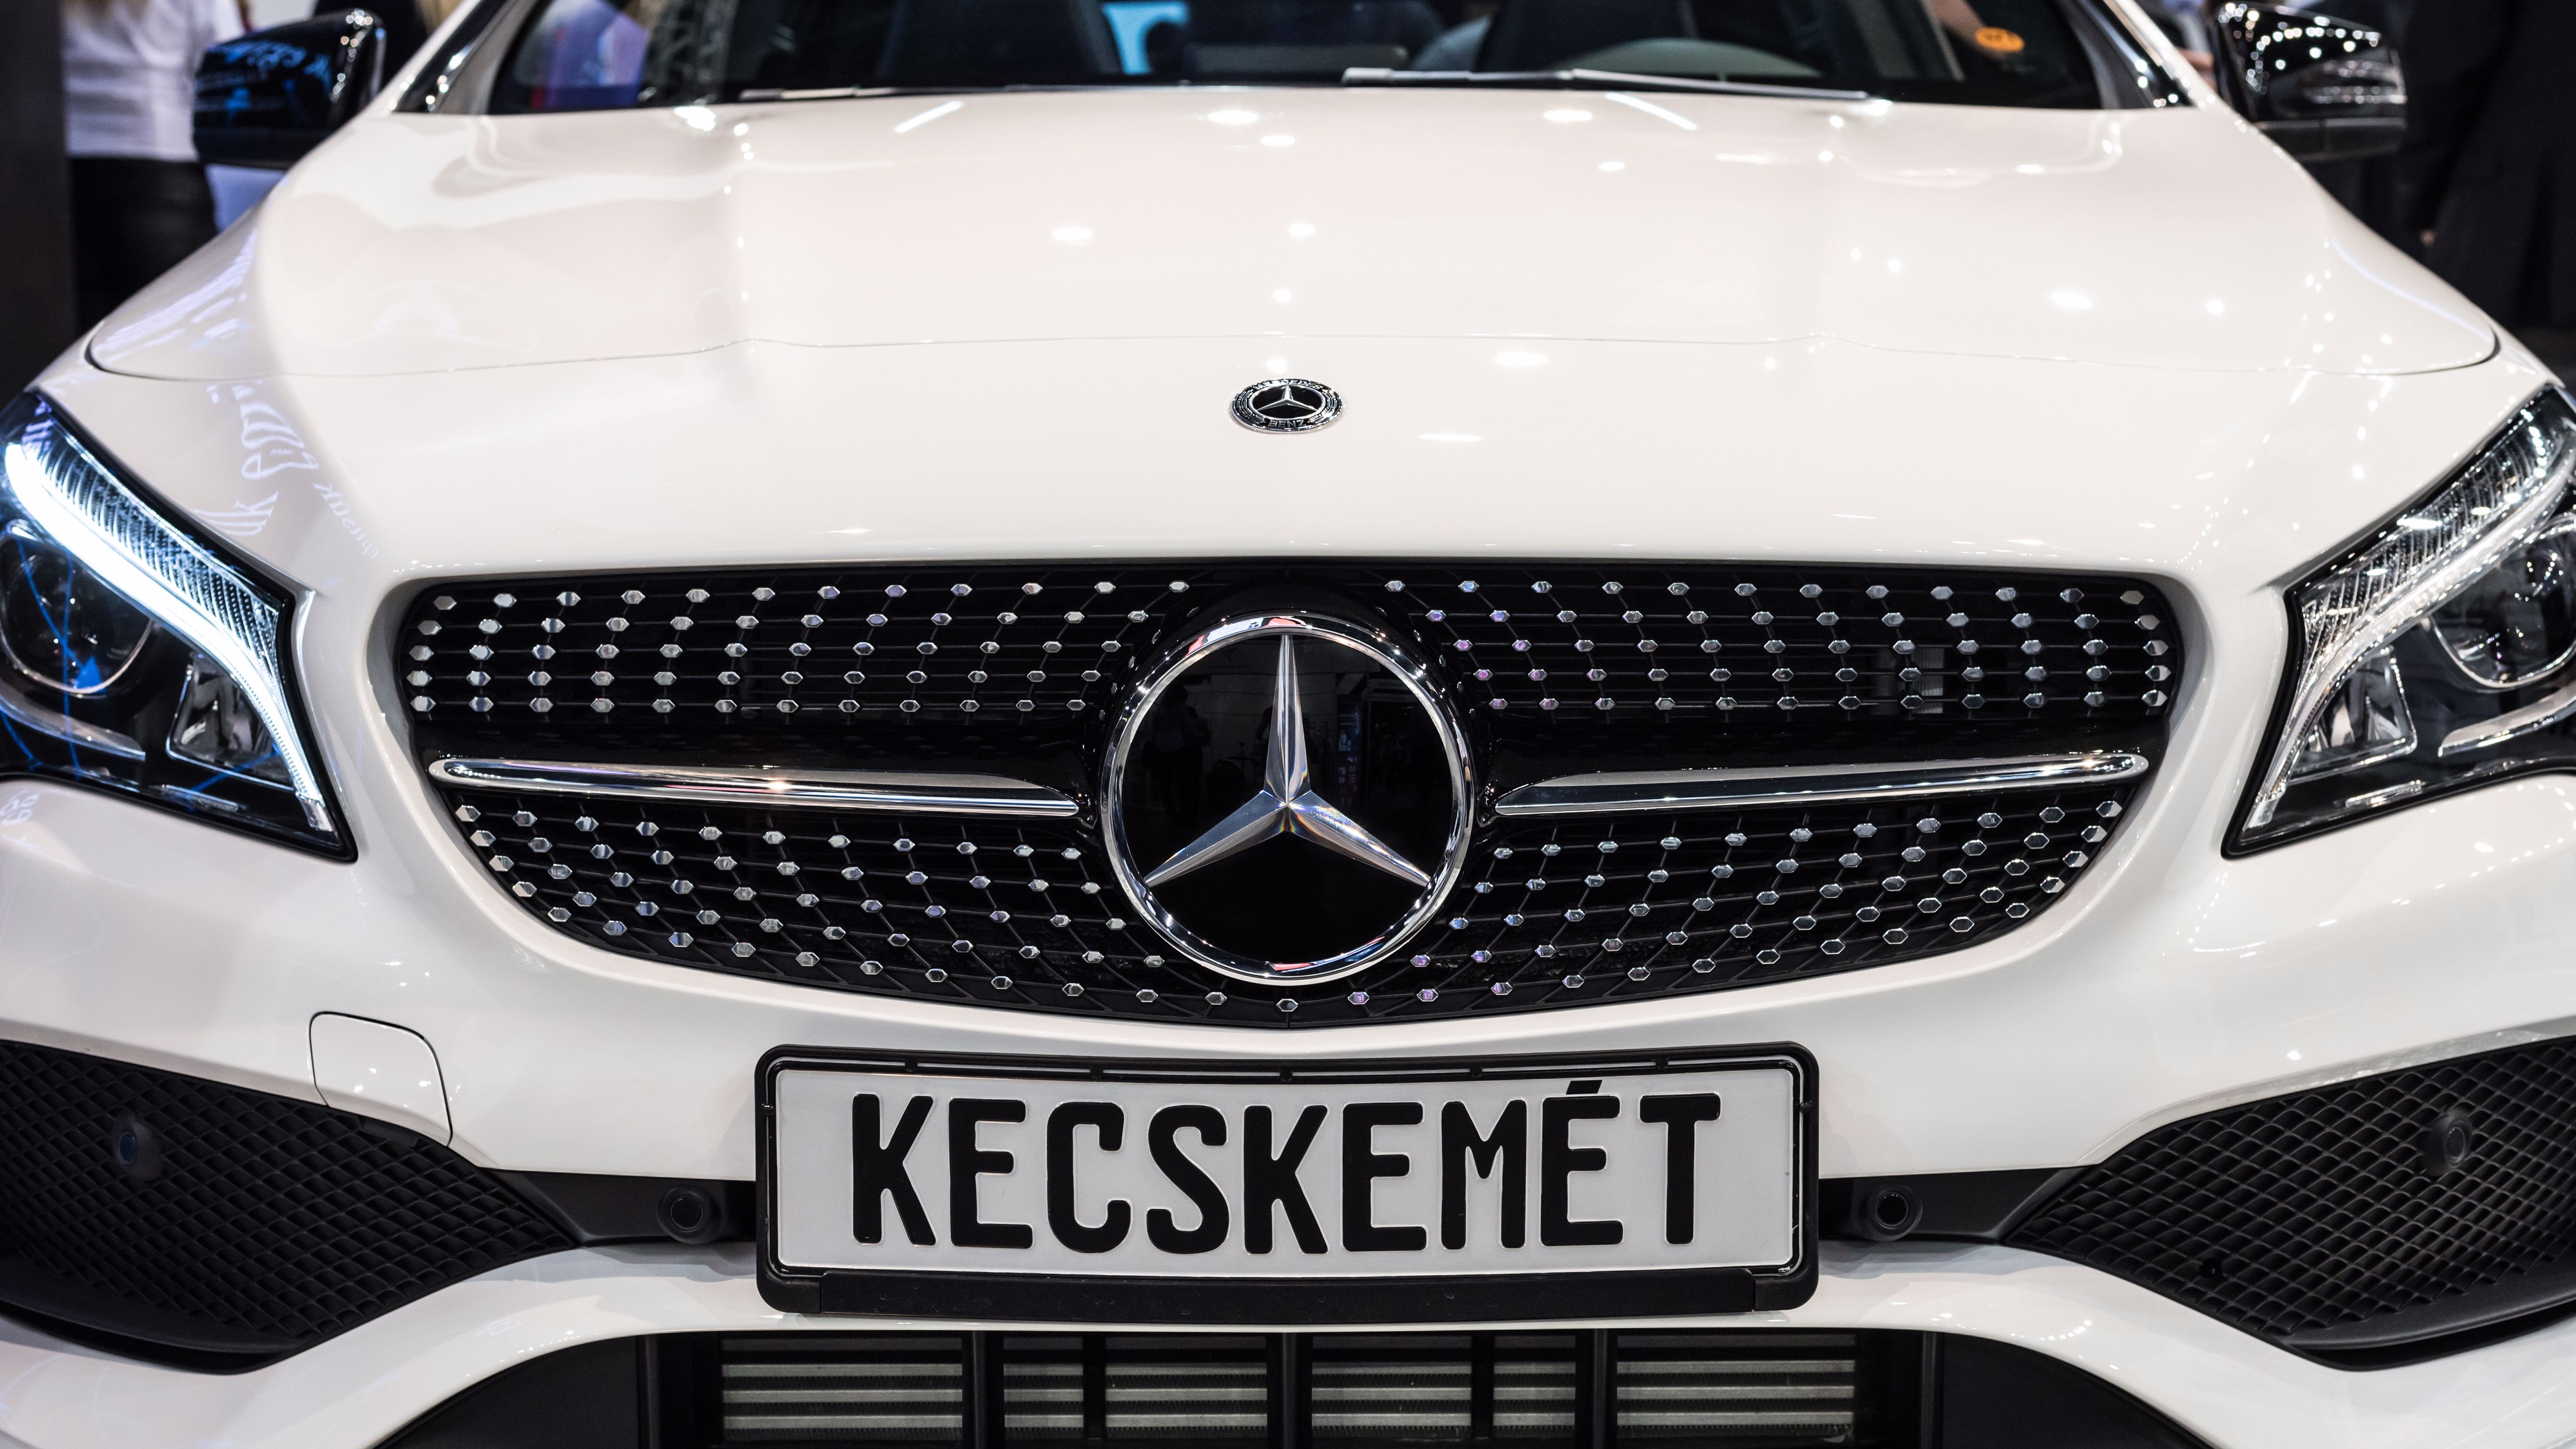 Hungary – jobs and wages to be maintained at Mercedes plant